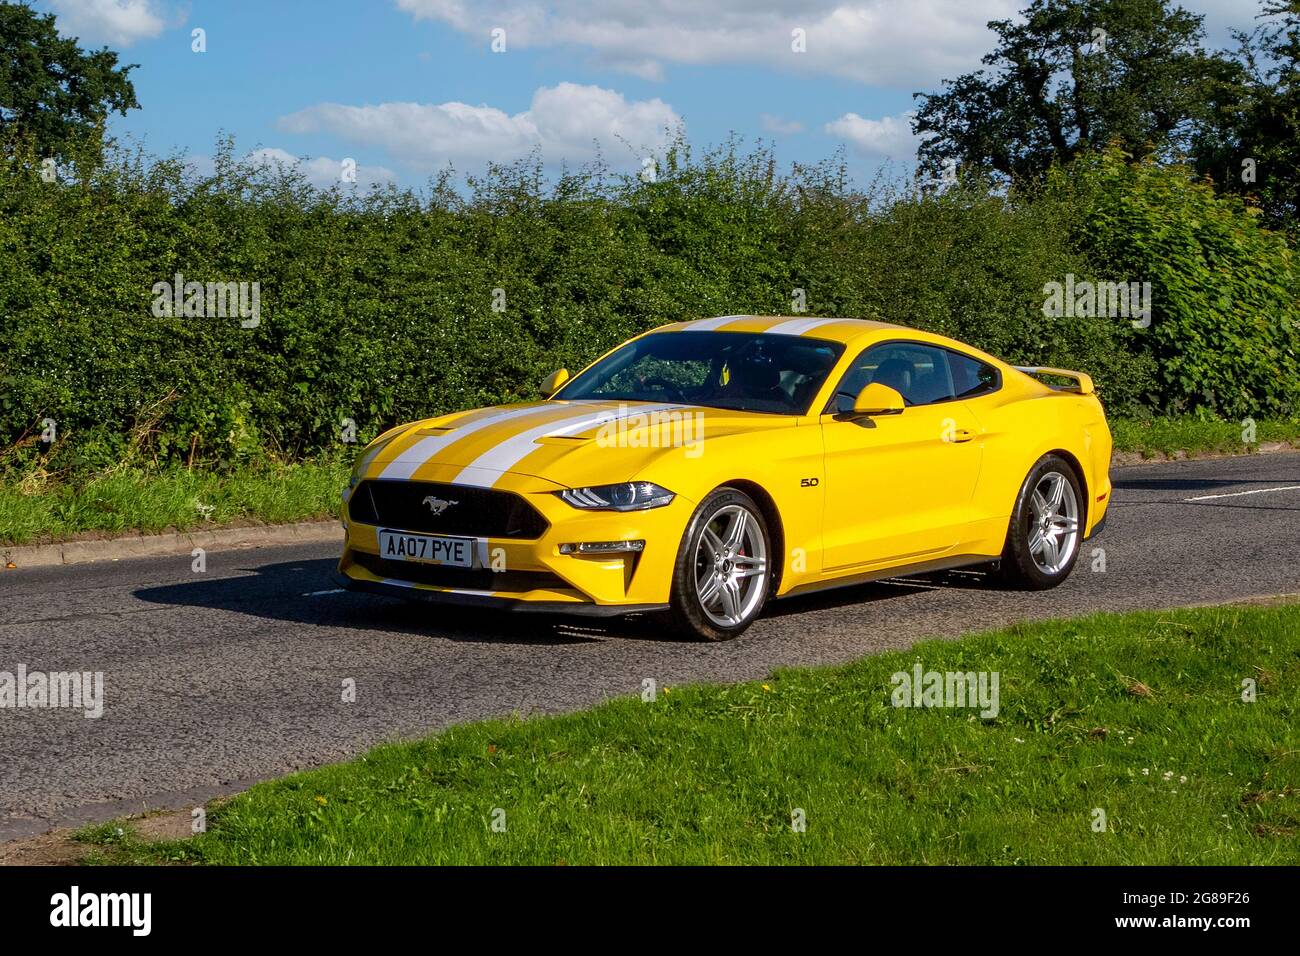 2008 yellow Ford Mustang 5038cc muscle car vehicle en-route to Capesthorne Hall classic July car show, Cheshire, UK Stock Photo